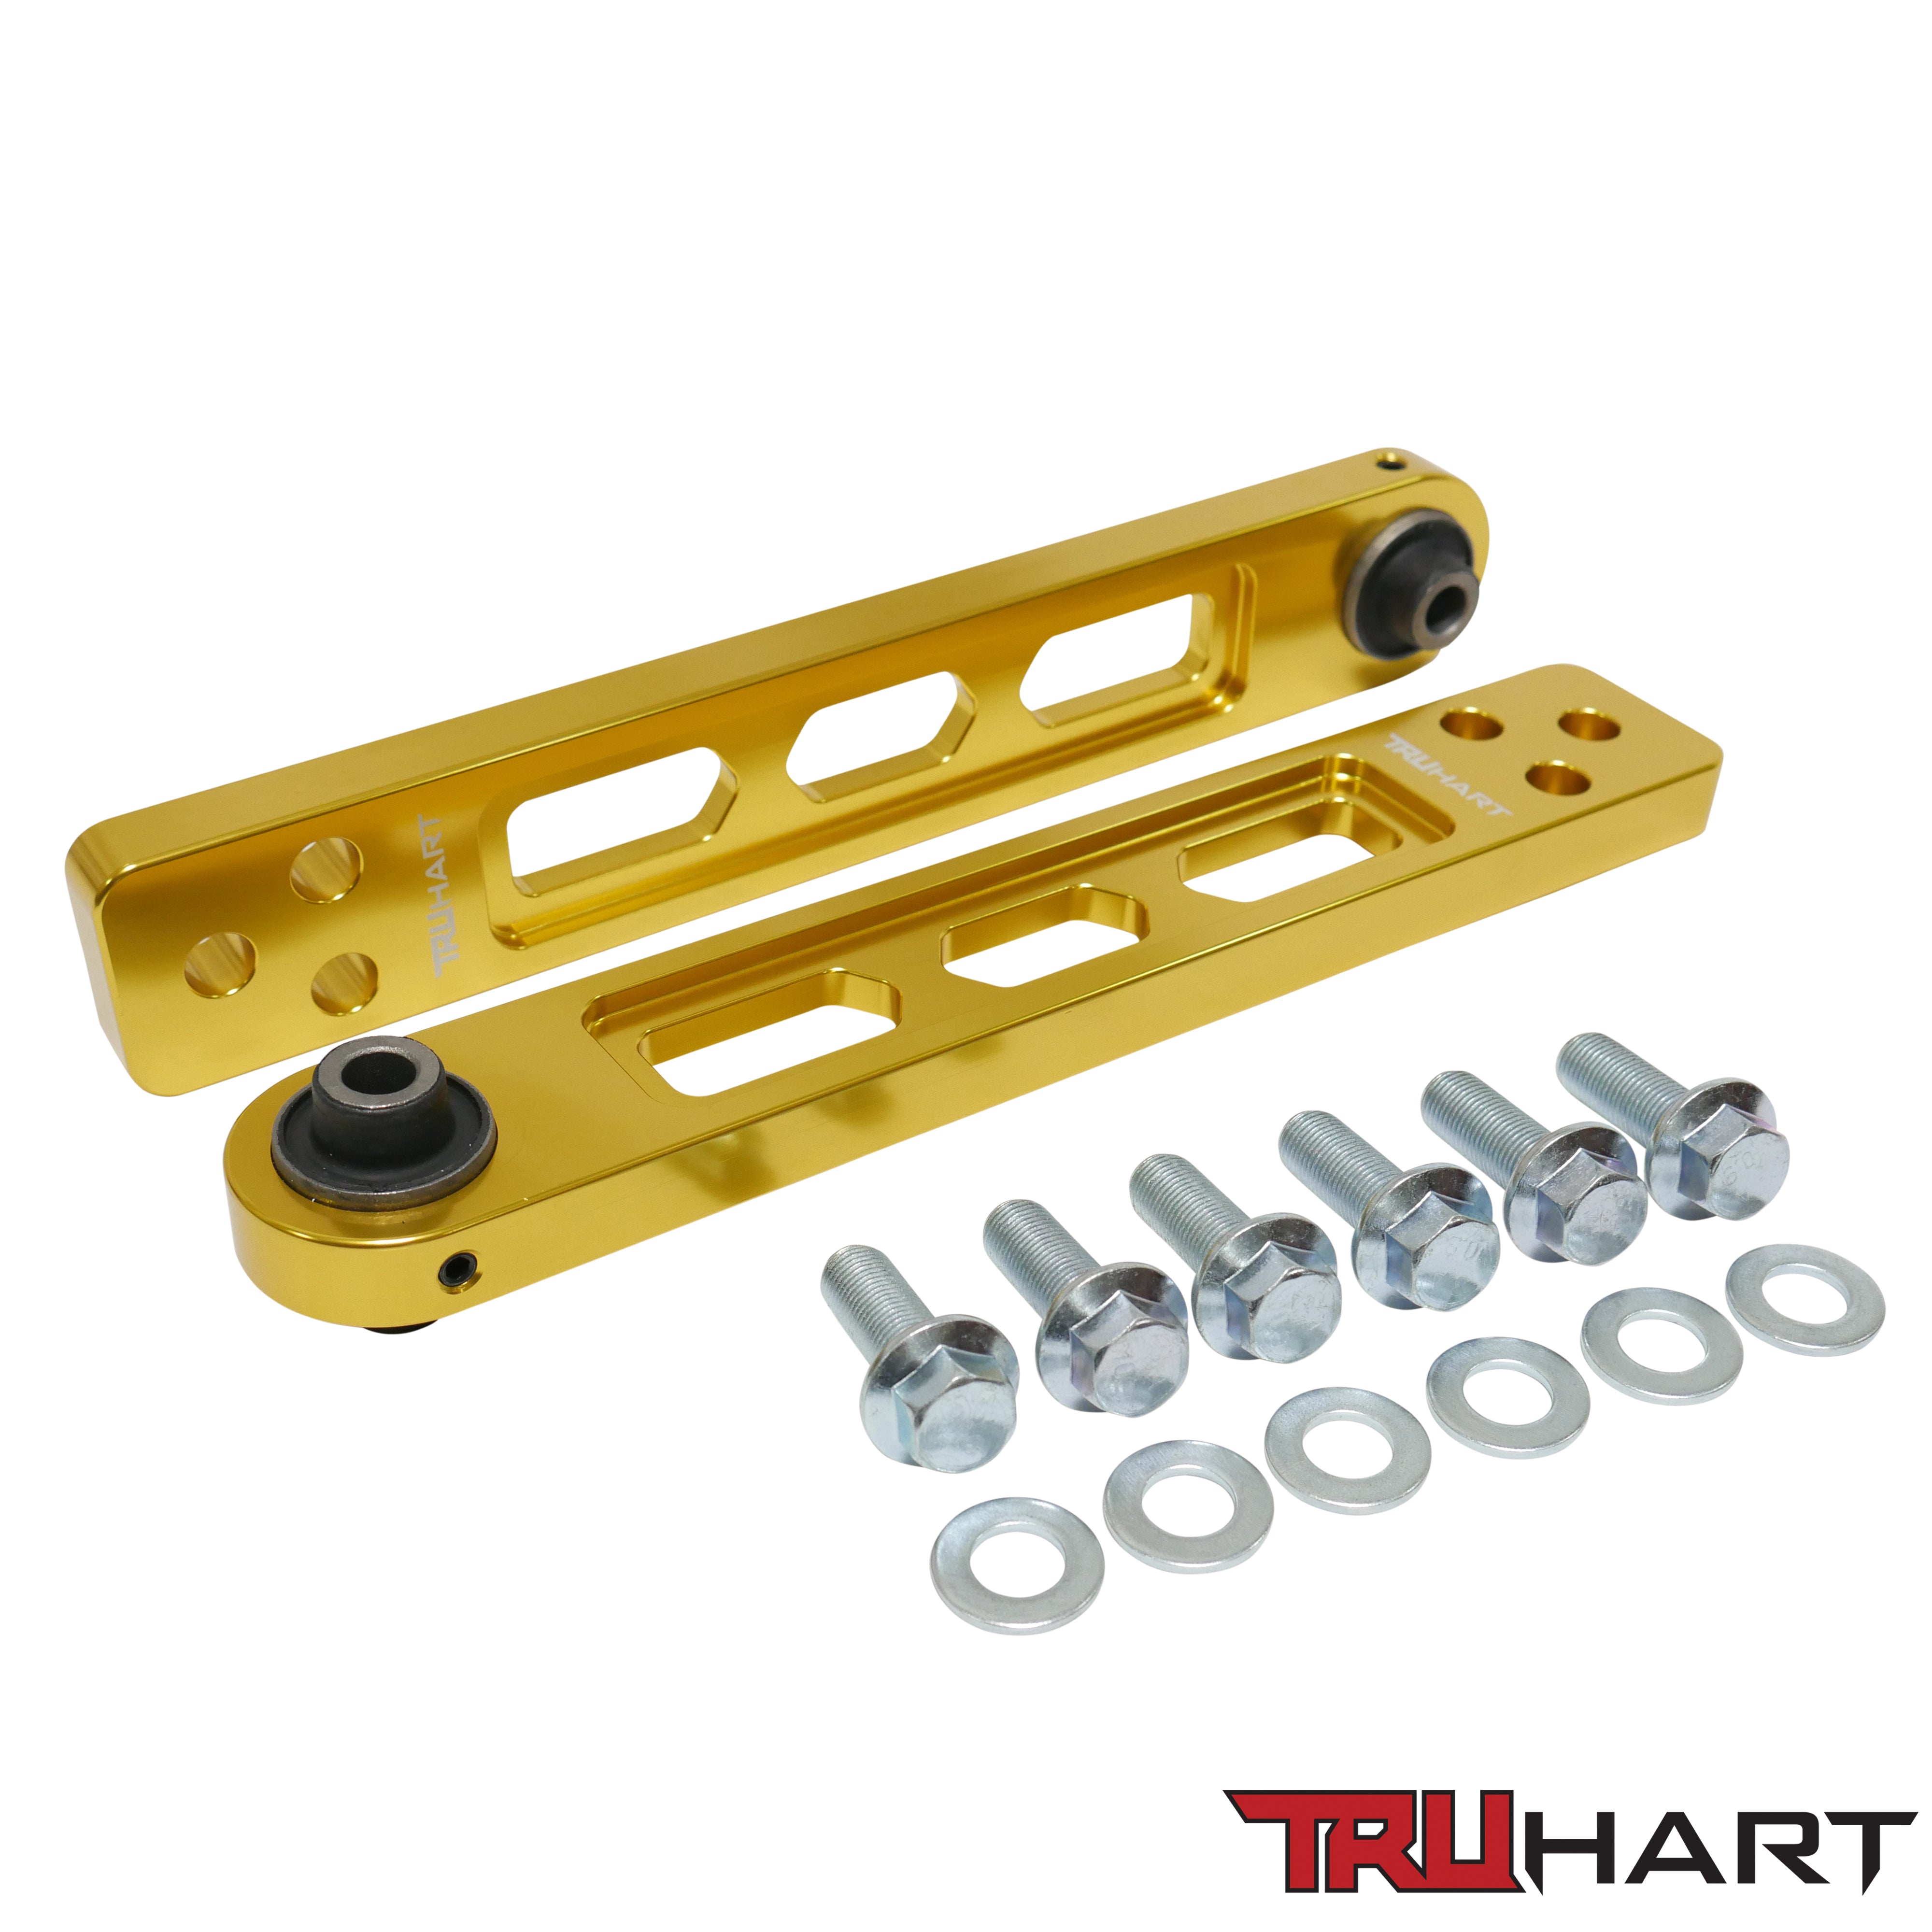 TruHart - Rear Lower Control Arms - Anodized Gold - TH-H103-GO - NextGen Tuning